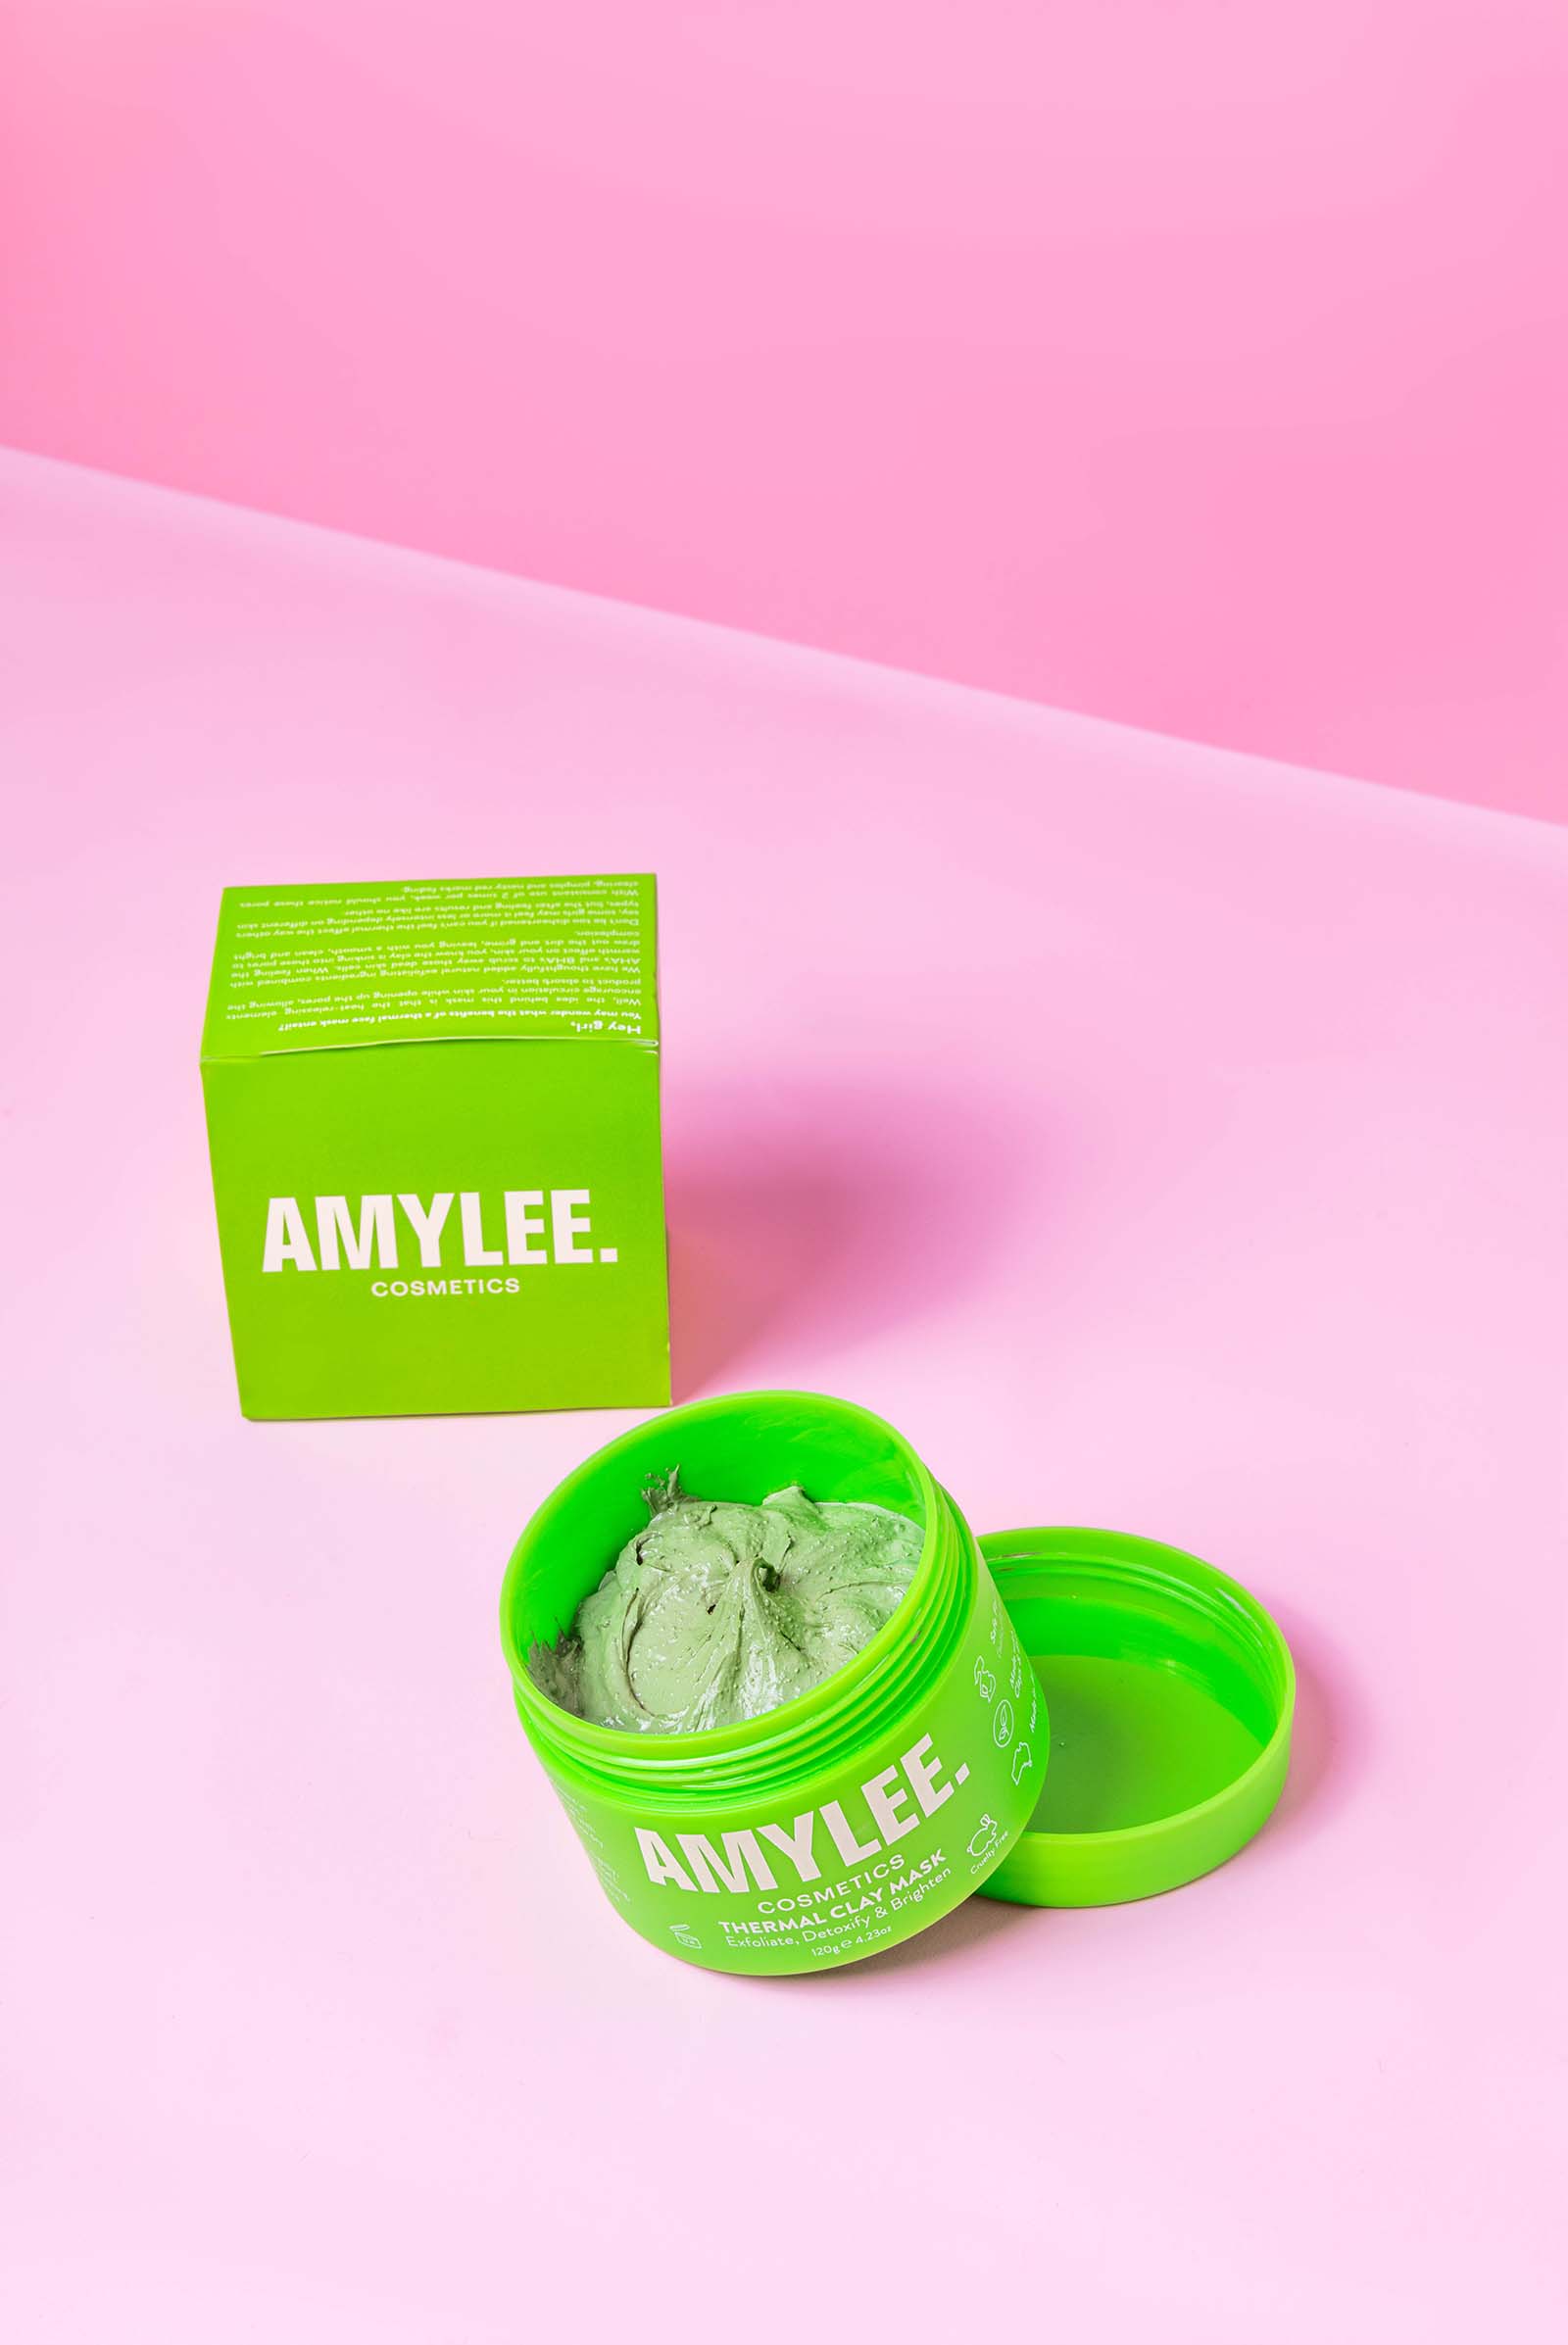 Bold product product photos for a clay mask brand. Styled product photos by Megzie Makes